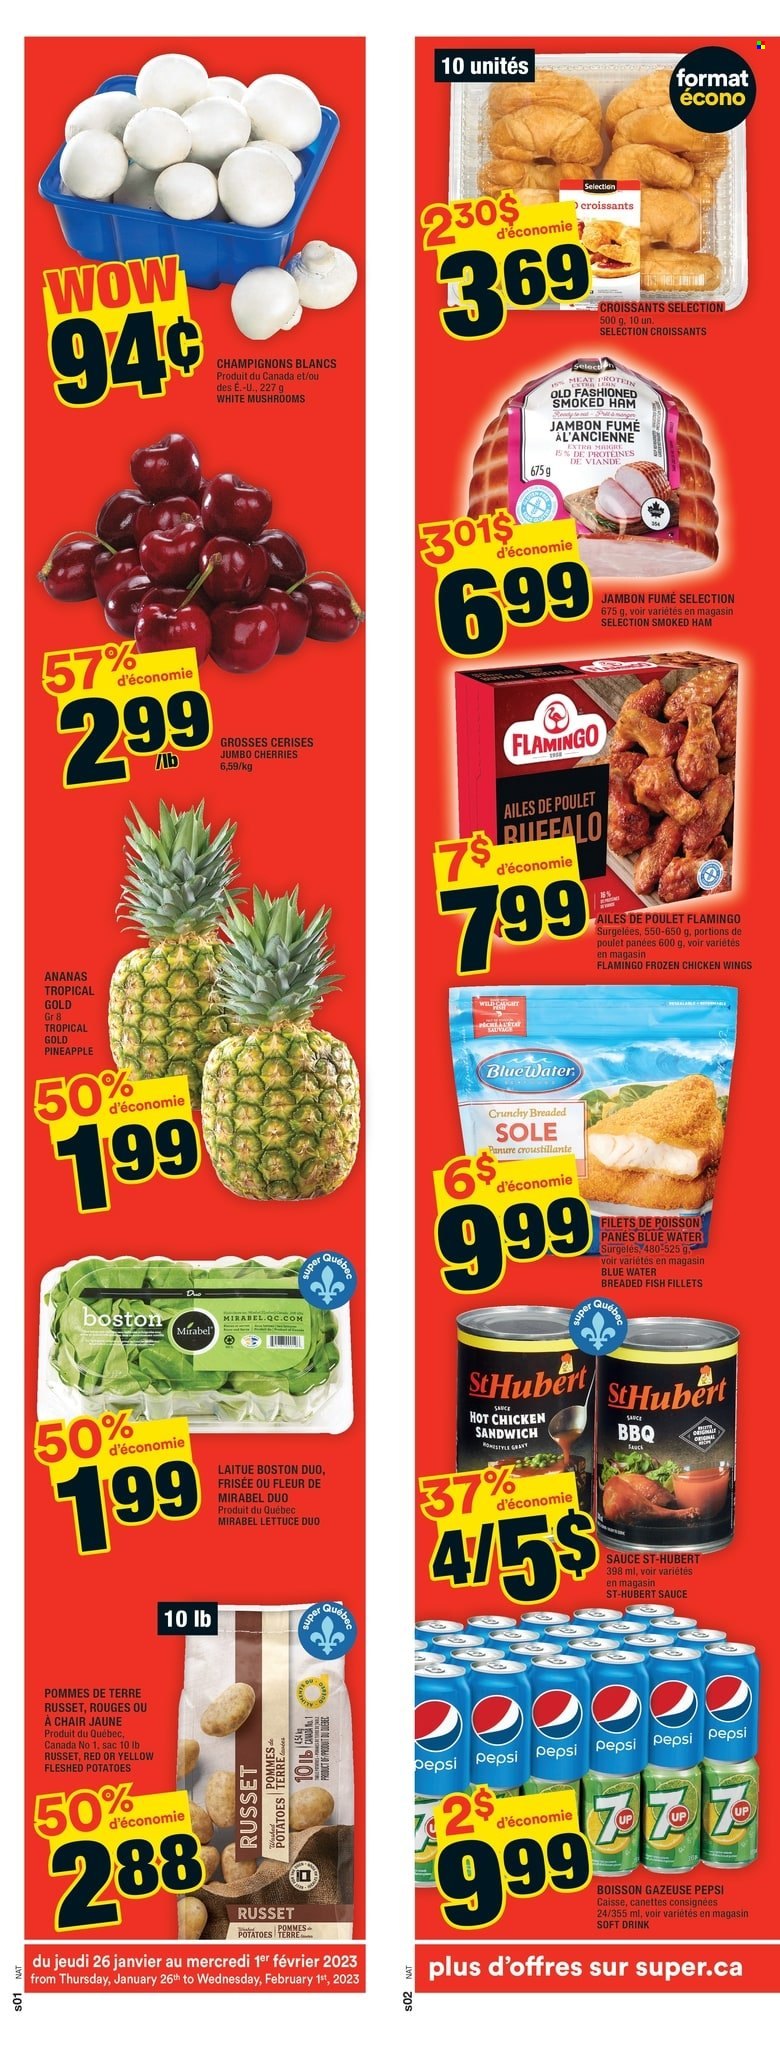 thumbnail - Super C Flyer - January 26, 2023 - February 01, 2023 - Sales products - mushrooms, croissant, russet potatoes, potatoes, lettuce, pineapple, cherries, fish fillets, fish, sandwich, sauce, breaded fish, ham, smoked ham, chicken wings, BBQ sauce, Pepsi, soft drink, chicken. Page 12.